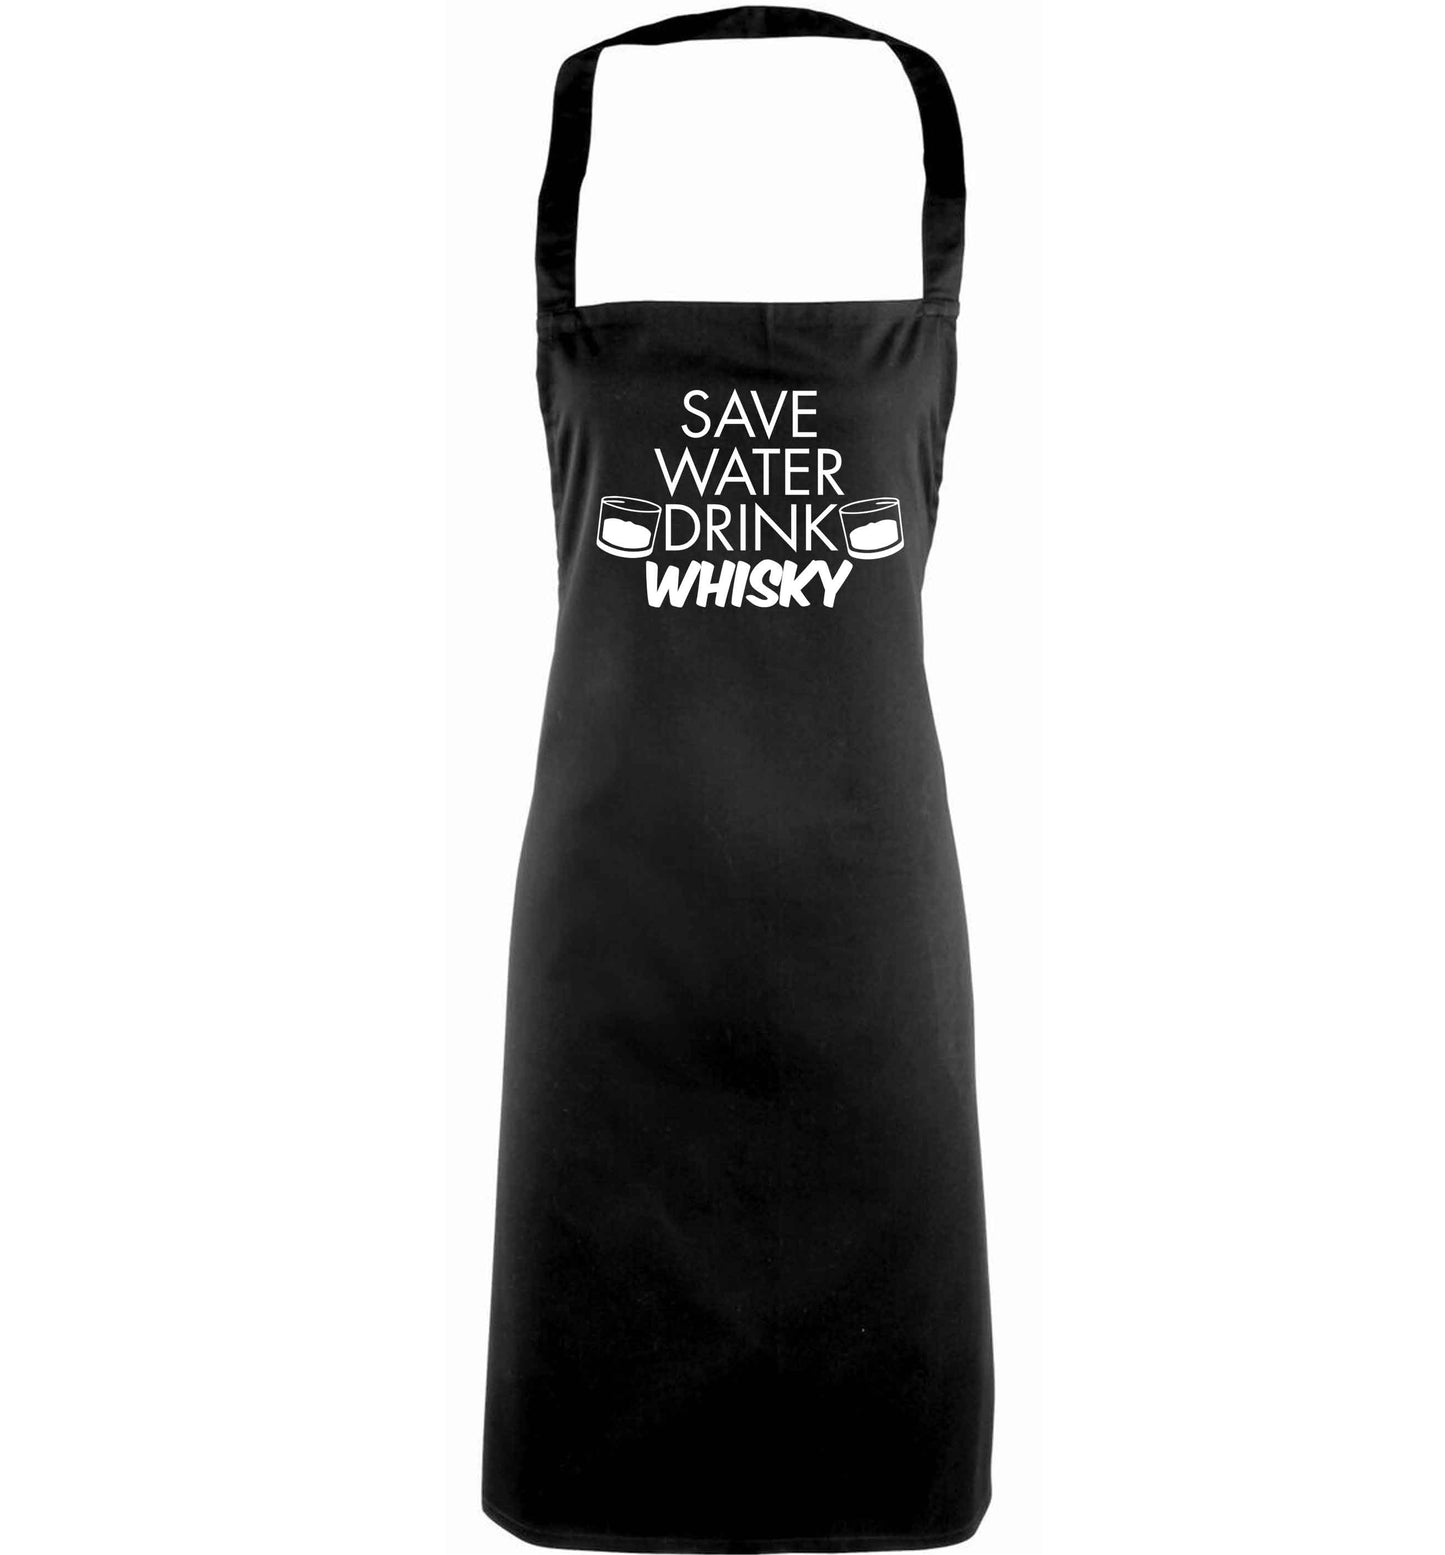 Save water drink whisky adults black apron